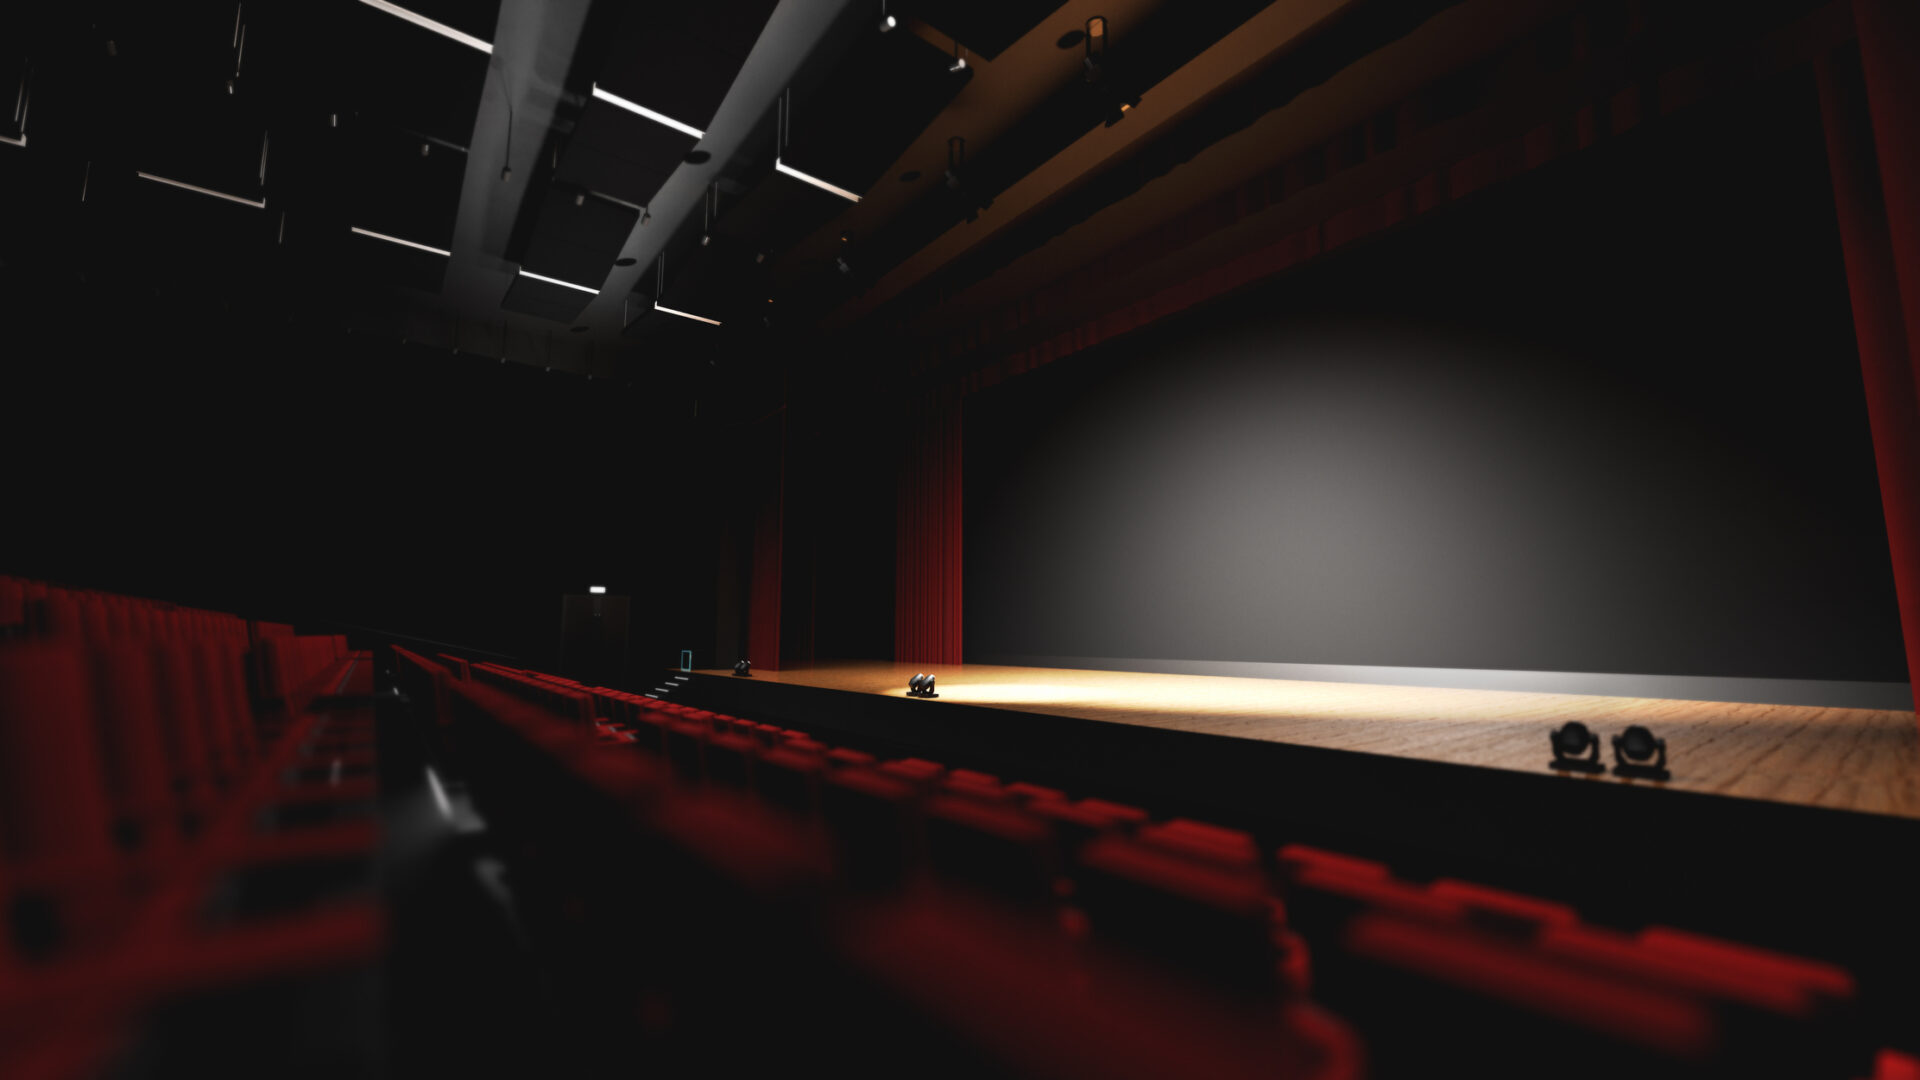 Theatre with empty stage in spotlight. Red theater curtain and seats. 3D illustration